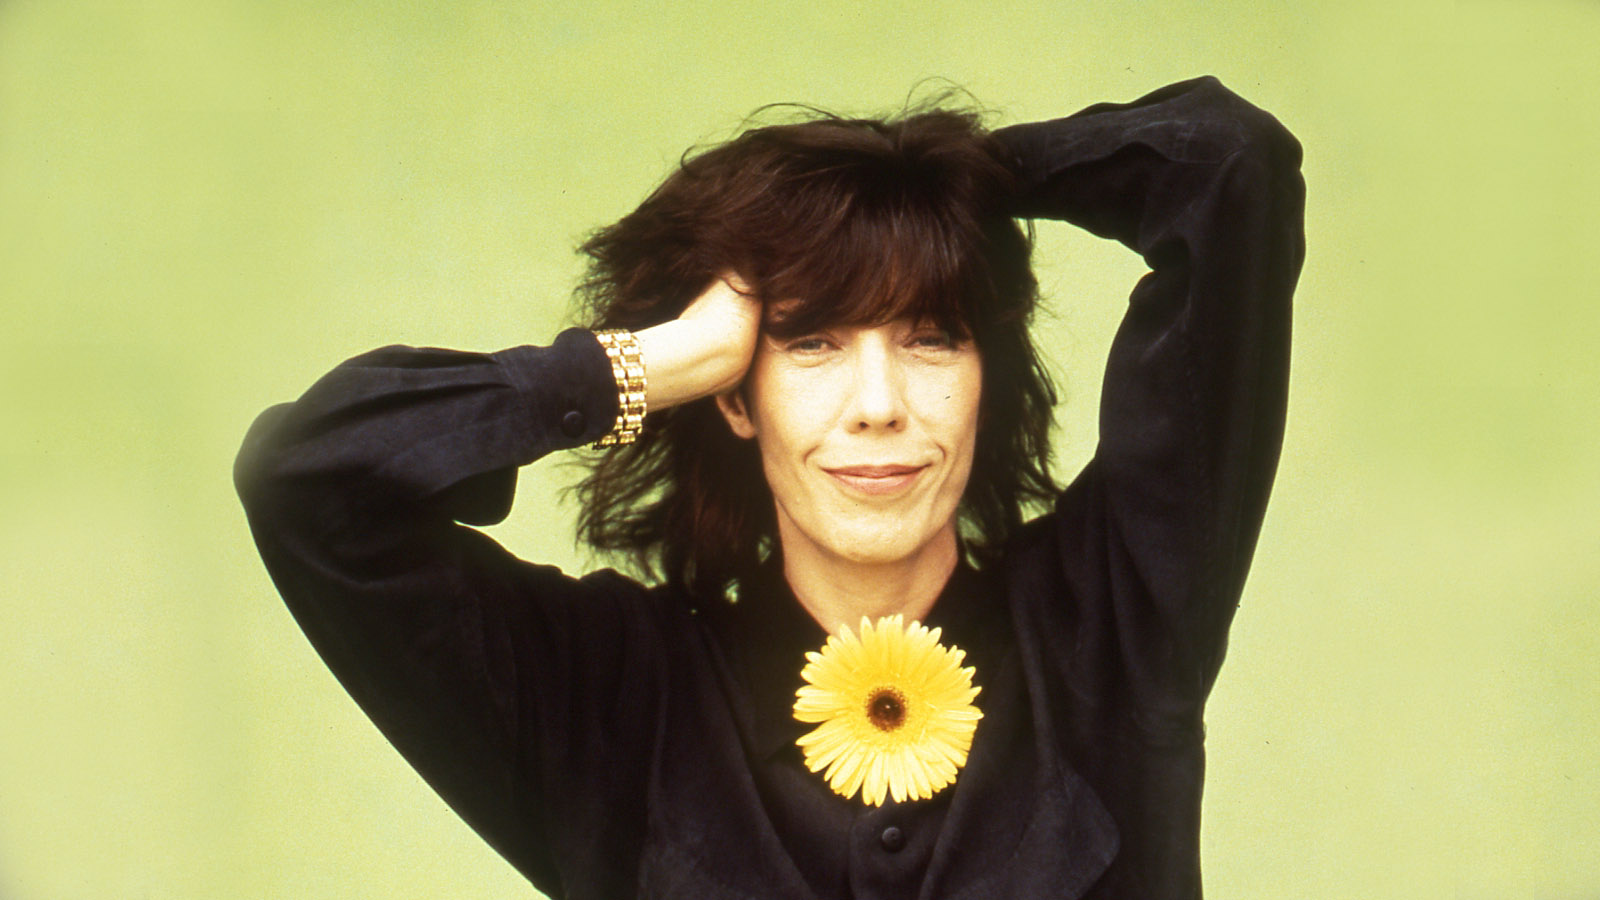 Lily tomlin young pics